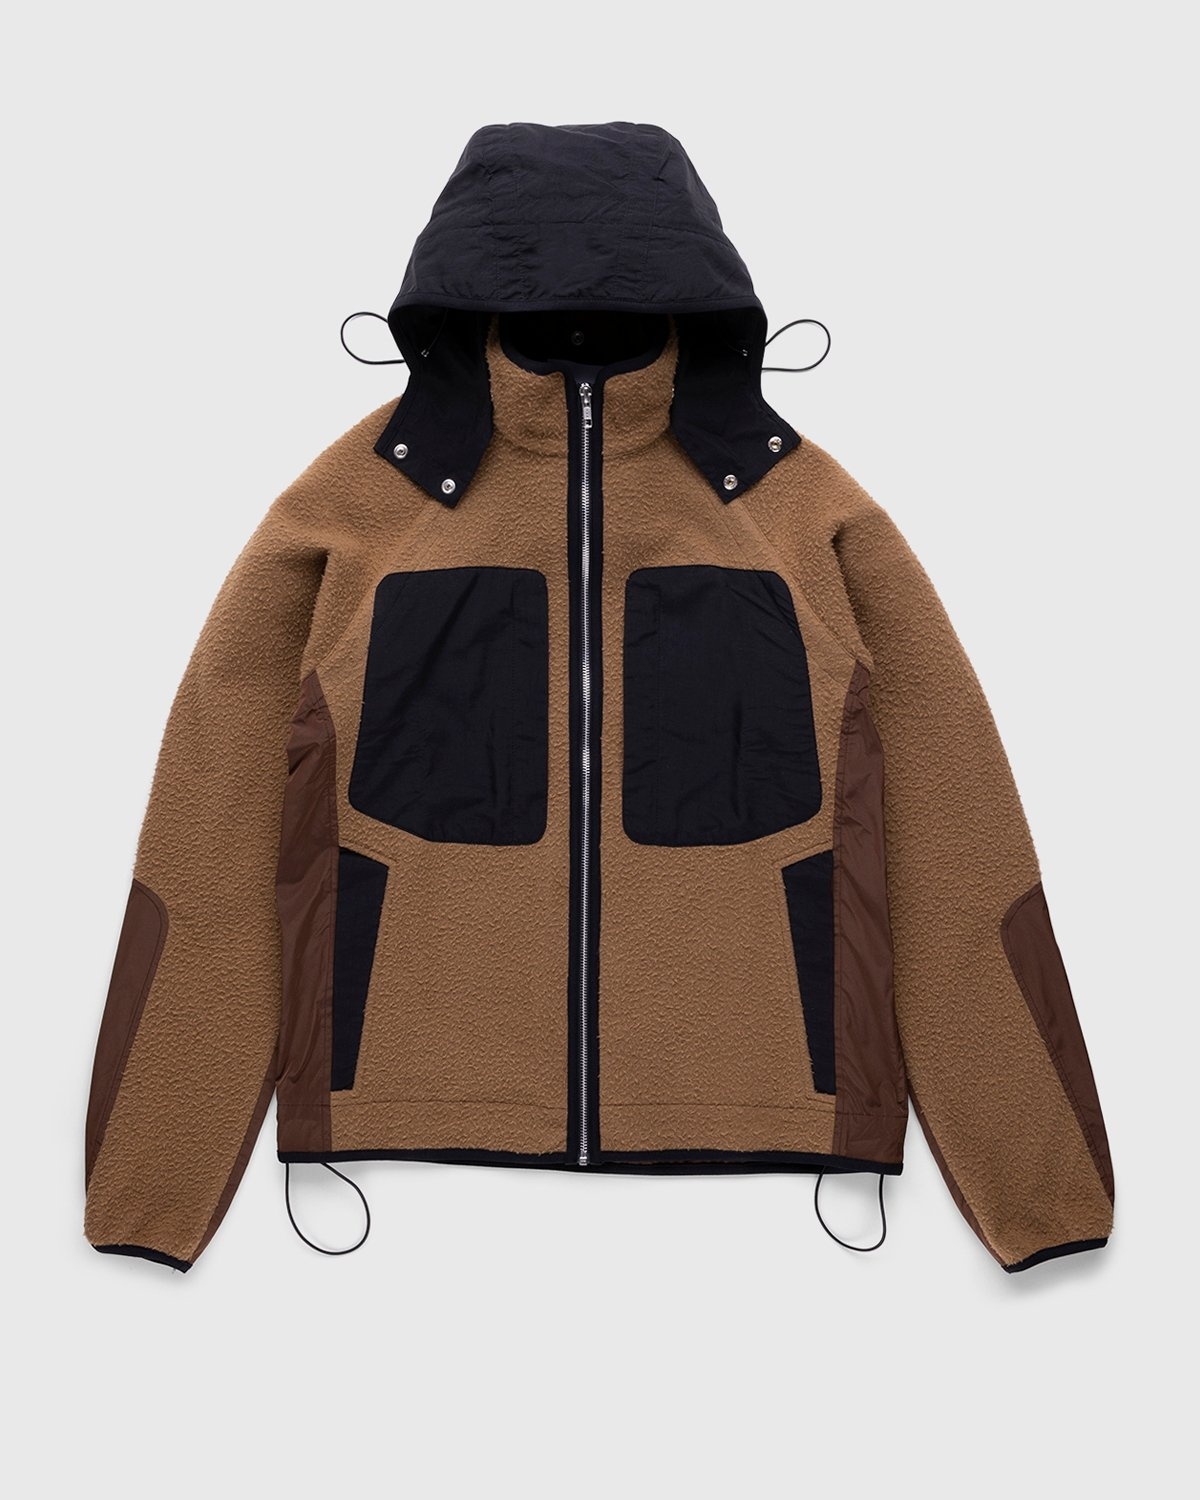 Arnar Mar Jonsson – Patch Pocket Hooded Tracktop Caramel Chocolate - Outerwear - Brown - Image 1